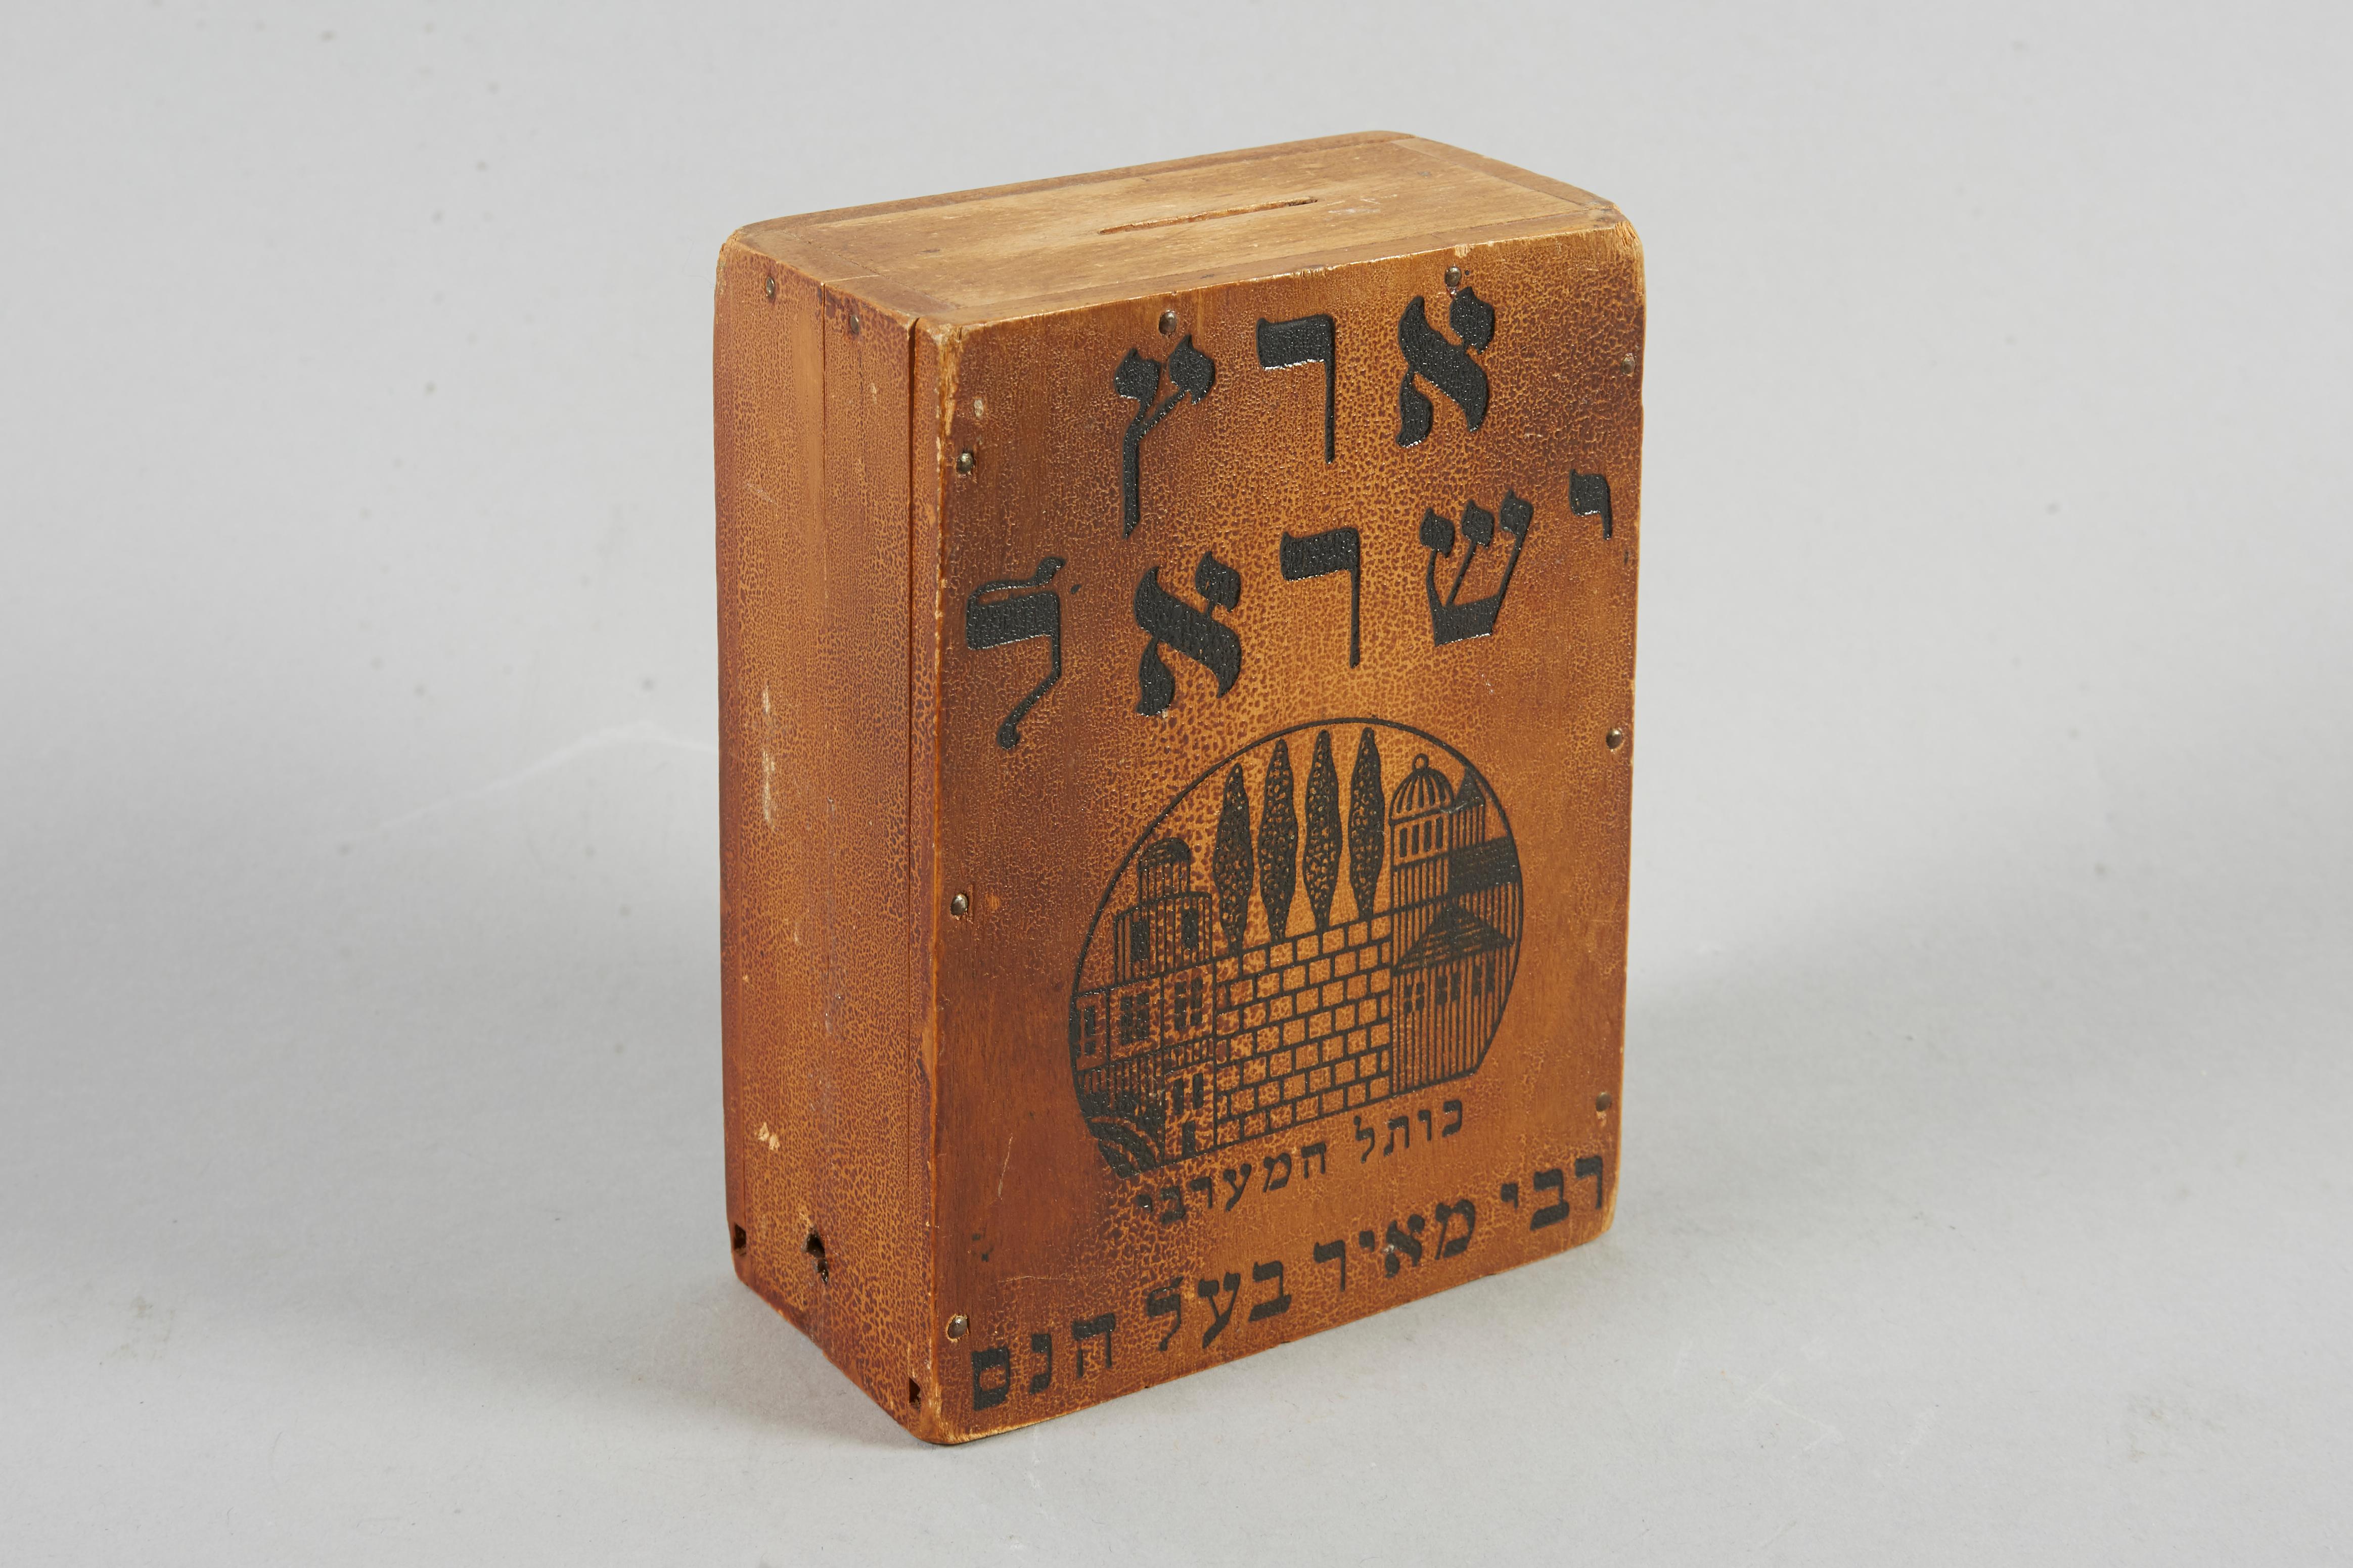 Judaica Charity box, made in Austria, circa 1920.
Printed with a scene of the Western Wall, inscribed in Hebrew “Land of Israel / Western Wall / Rabbi Meir Ba’al Ha-Nes”. Charity boxes made of tin were issued both in Europe and the United States